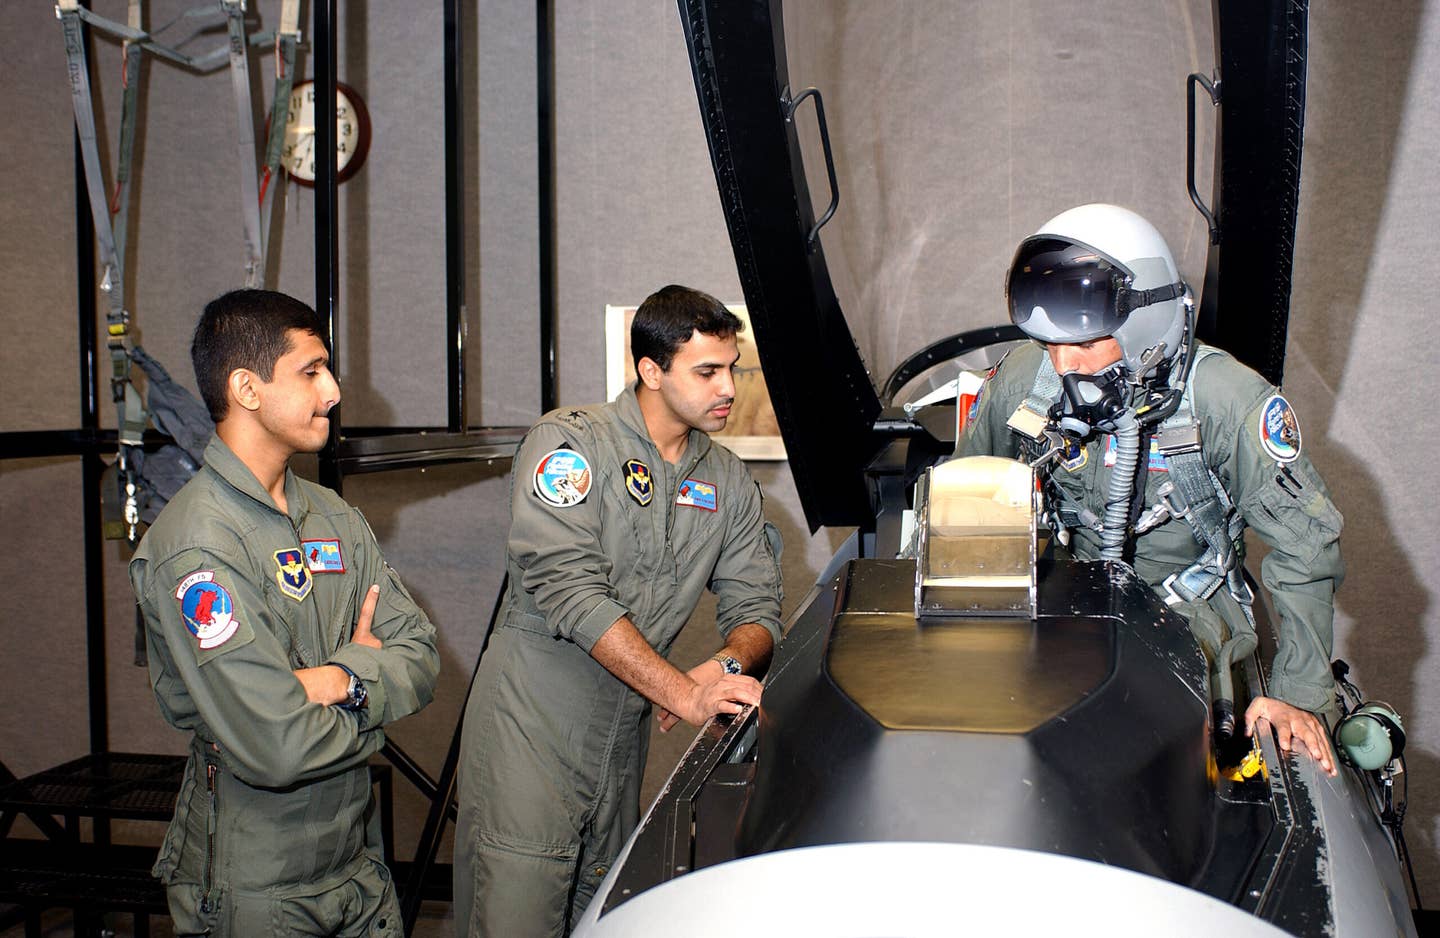 Three student pilots from the United Arab Emirates practice emergency egress procedures as part of their F-16 flight training with the 162nd Fighter Wing of the Arizona Air National Guard in Tucson, Arizona. <em>U.S. Air Force photo/Master Sgt. Dave Neve</em>